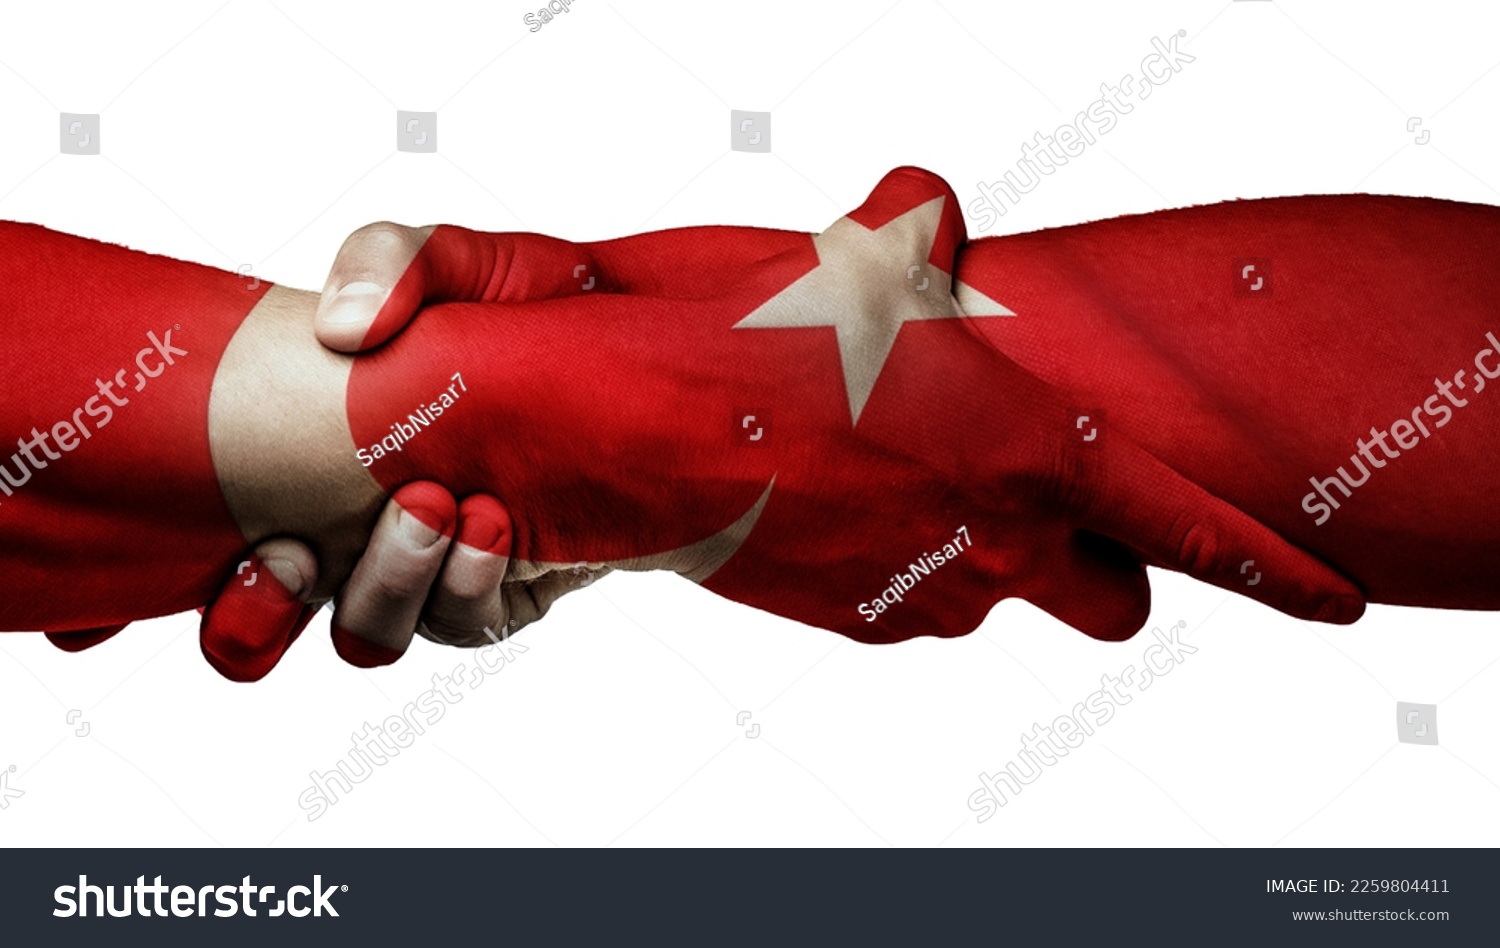 Turkey Earthquake shaking hands. Two hands, helping arm of a friend, teamwork. Dramatic help hands holding together representing friendship, help and hope, donation, assistance. Helping old, poor  #2259804411